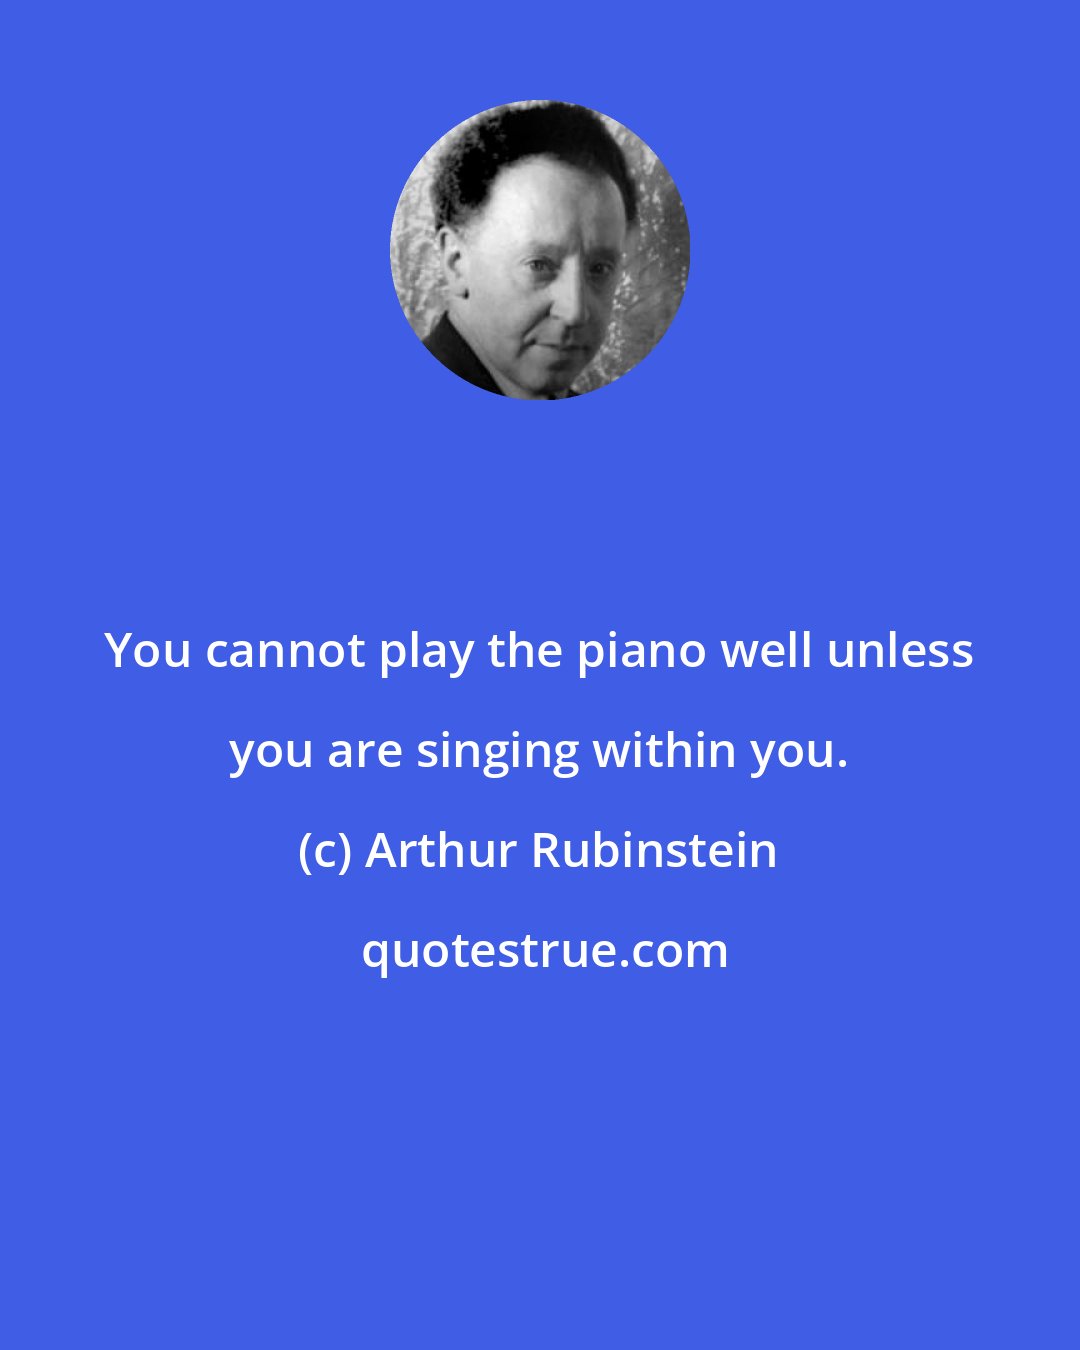 Arthur Rubinstein: You cannot play the piano well unless you are singing within you.